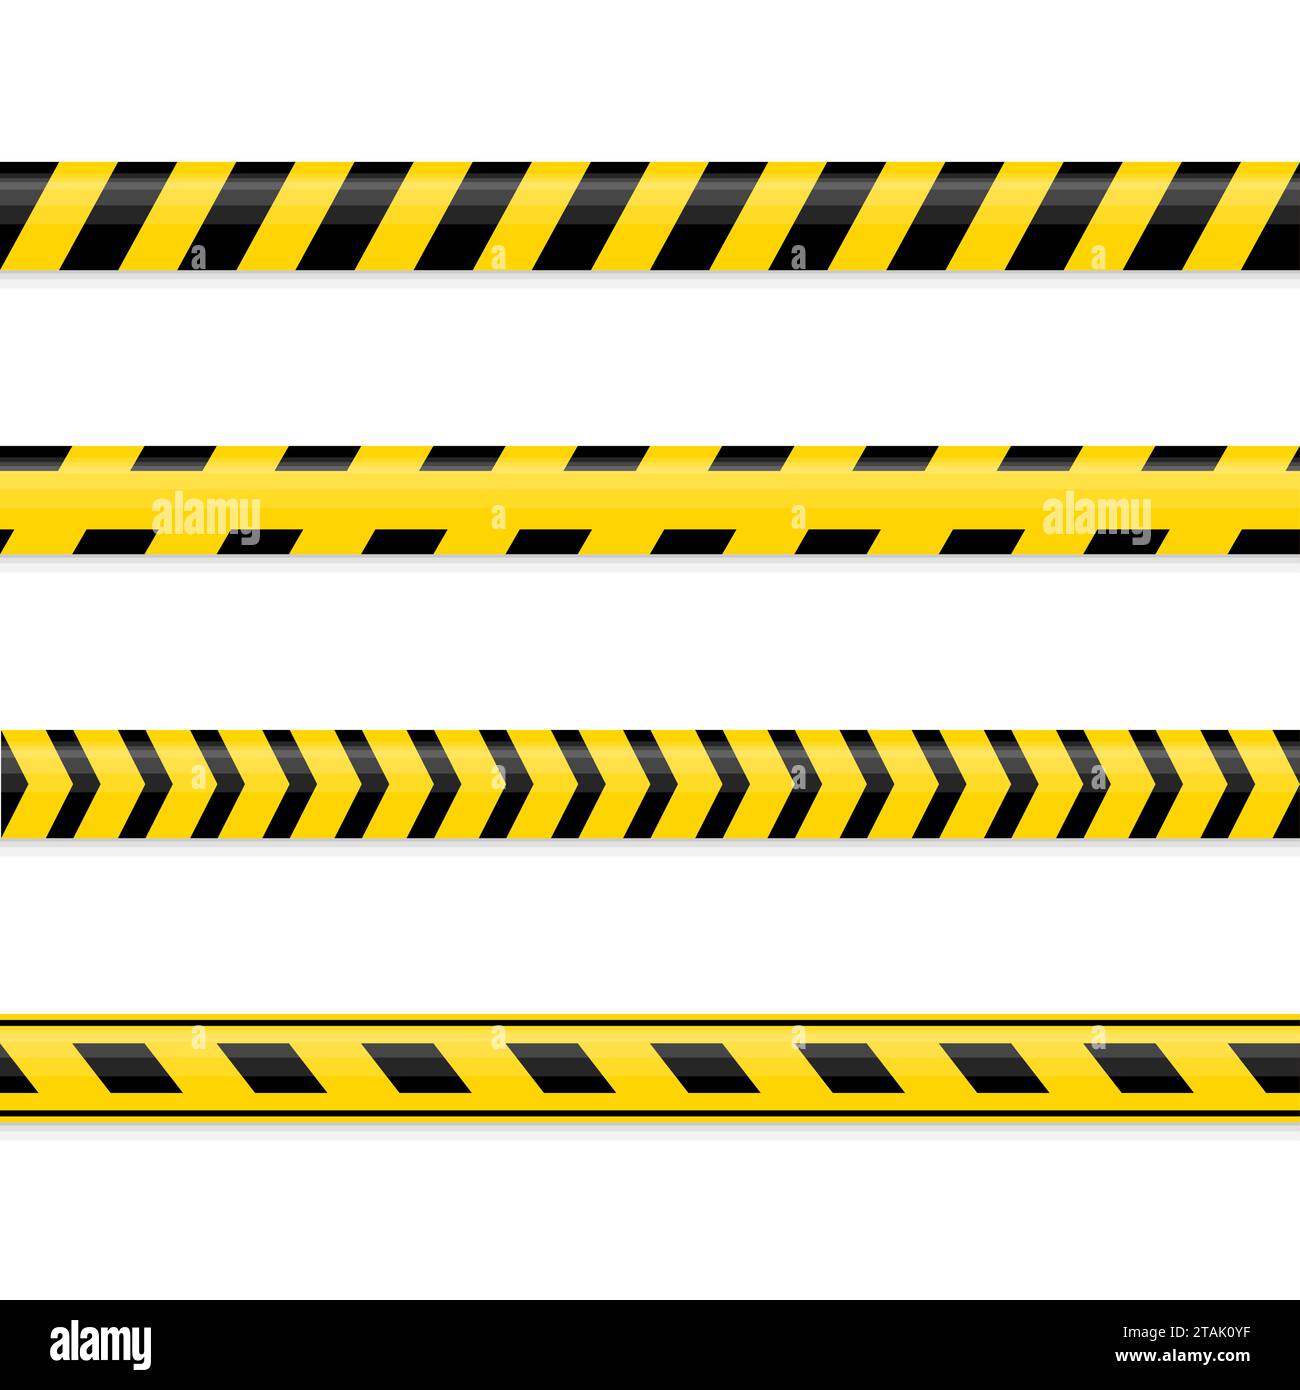 Set of seamless yellow and black warning tapes isolated on white background. Police insulation line, signs of danger, do not cross, warning, caution. Stock Vector